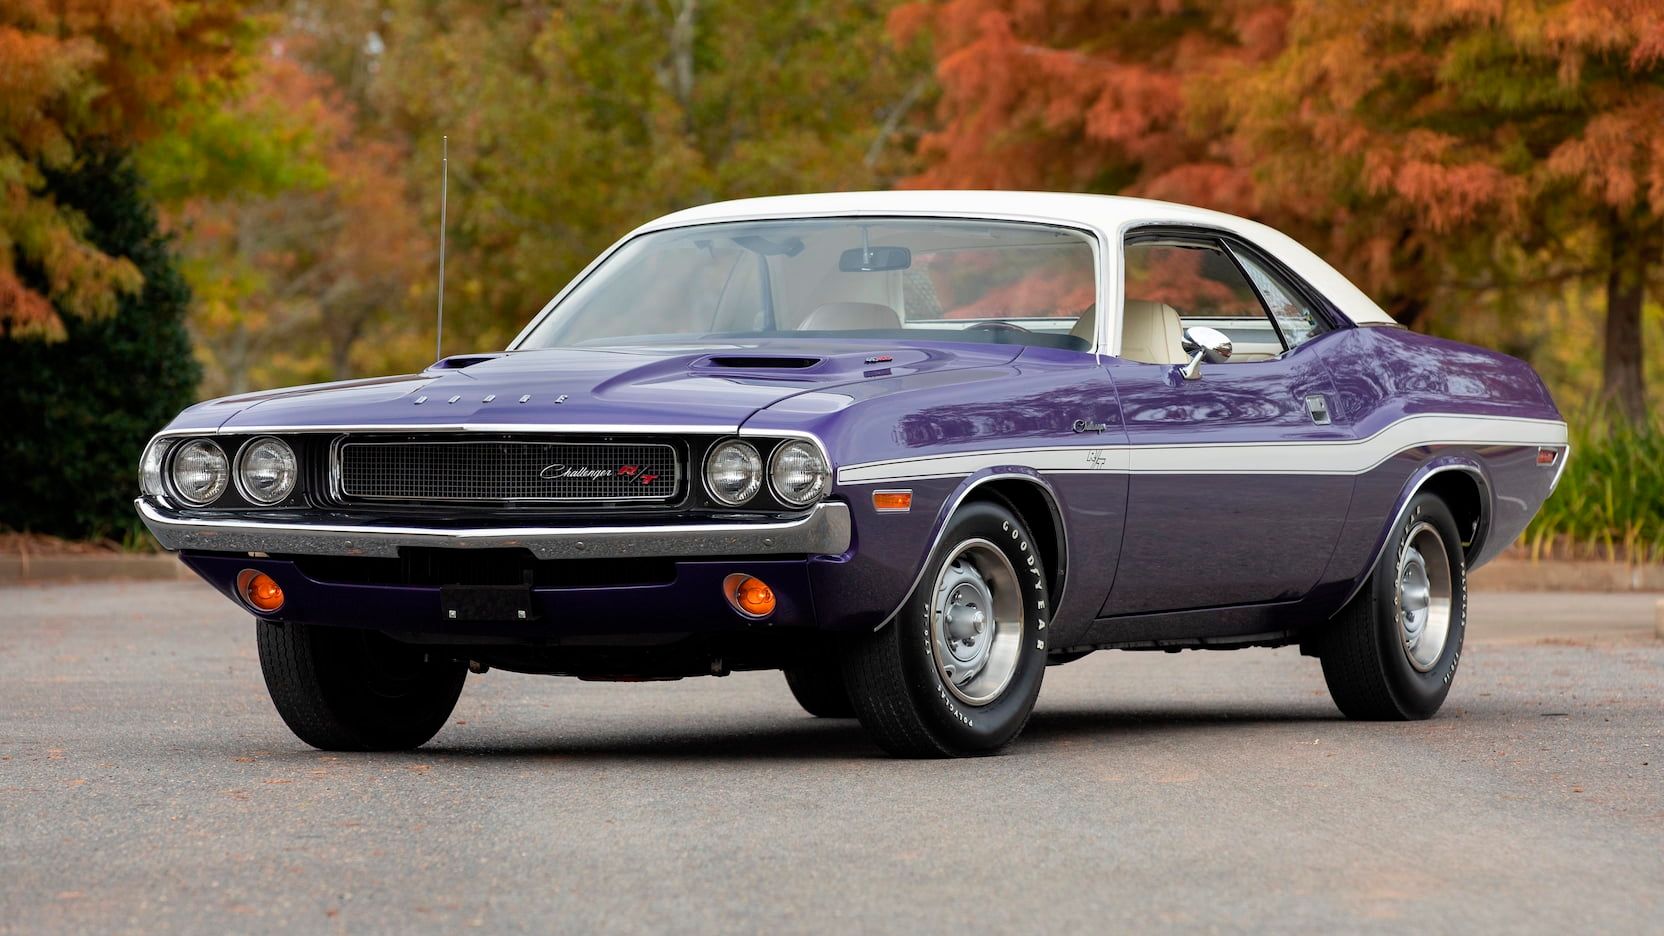 Purple 1970 Dodge Challenger RT Magnum 440 on the road